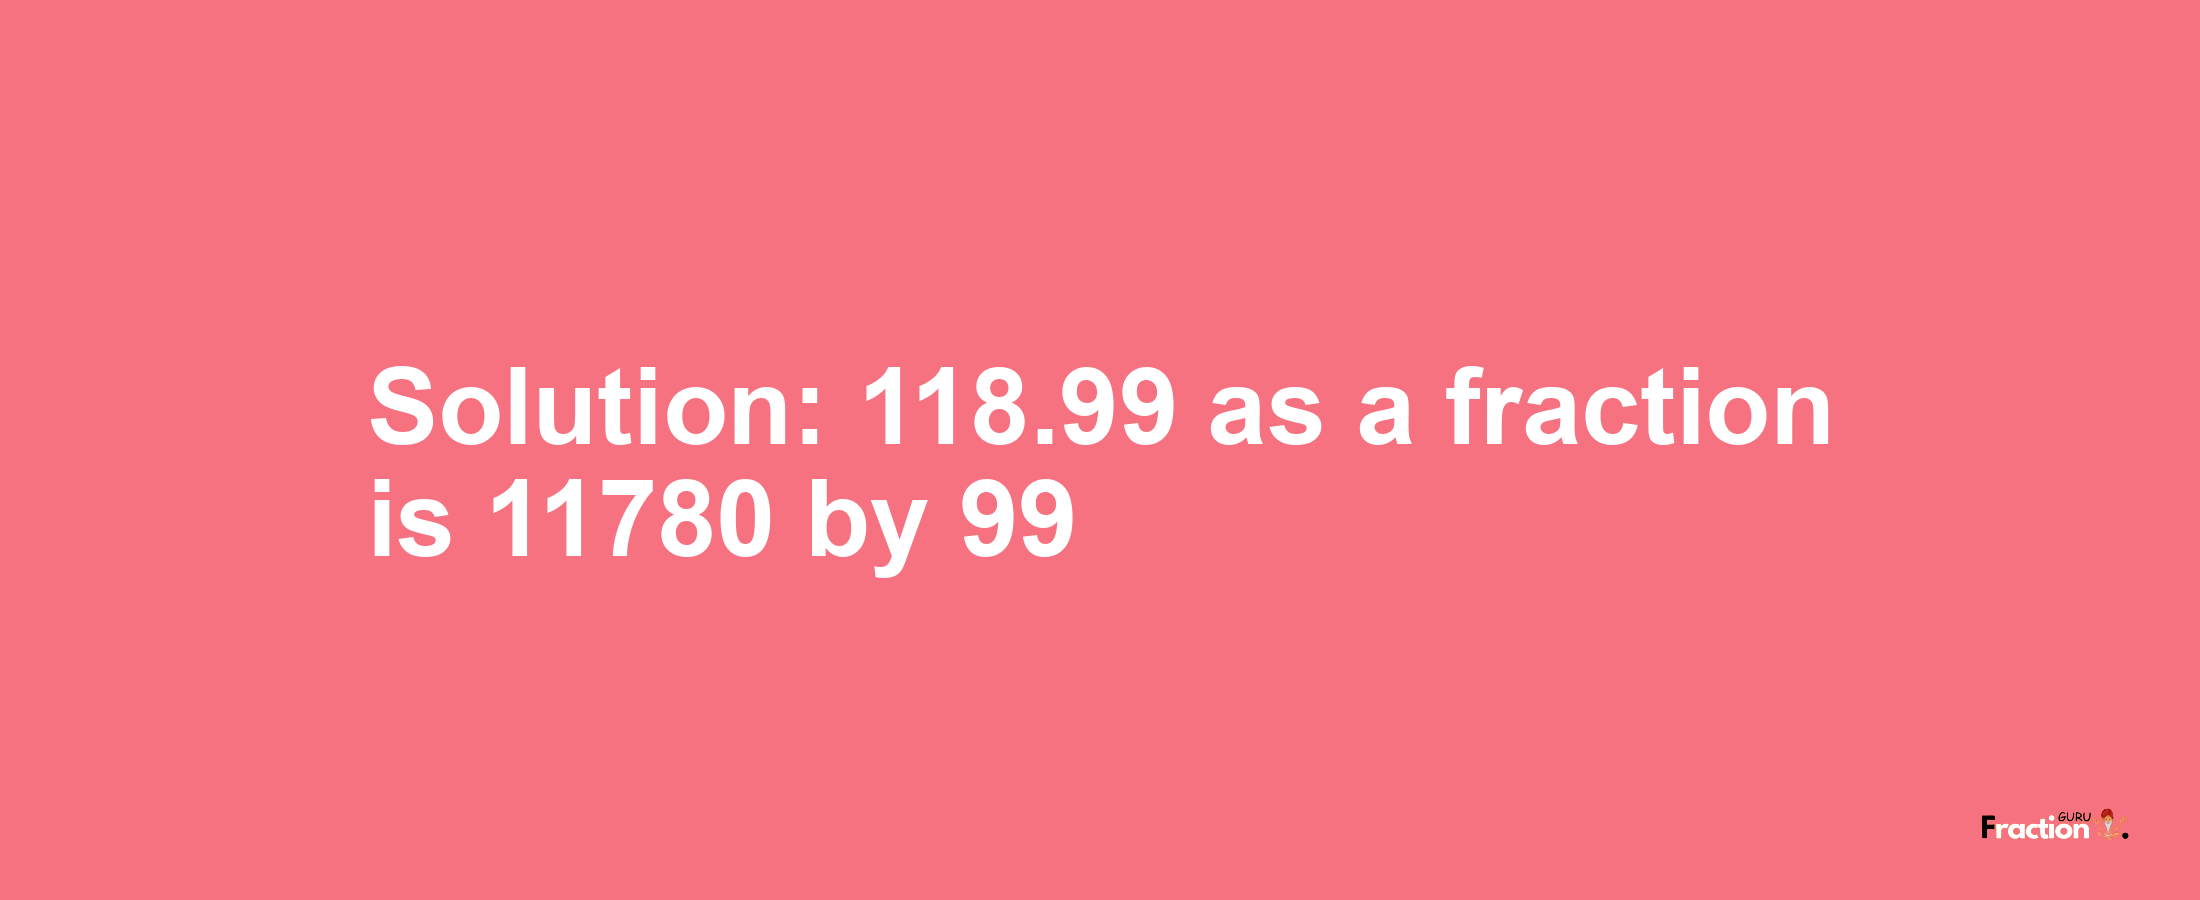 Solution:118.99 as a fraction is 11780/99